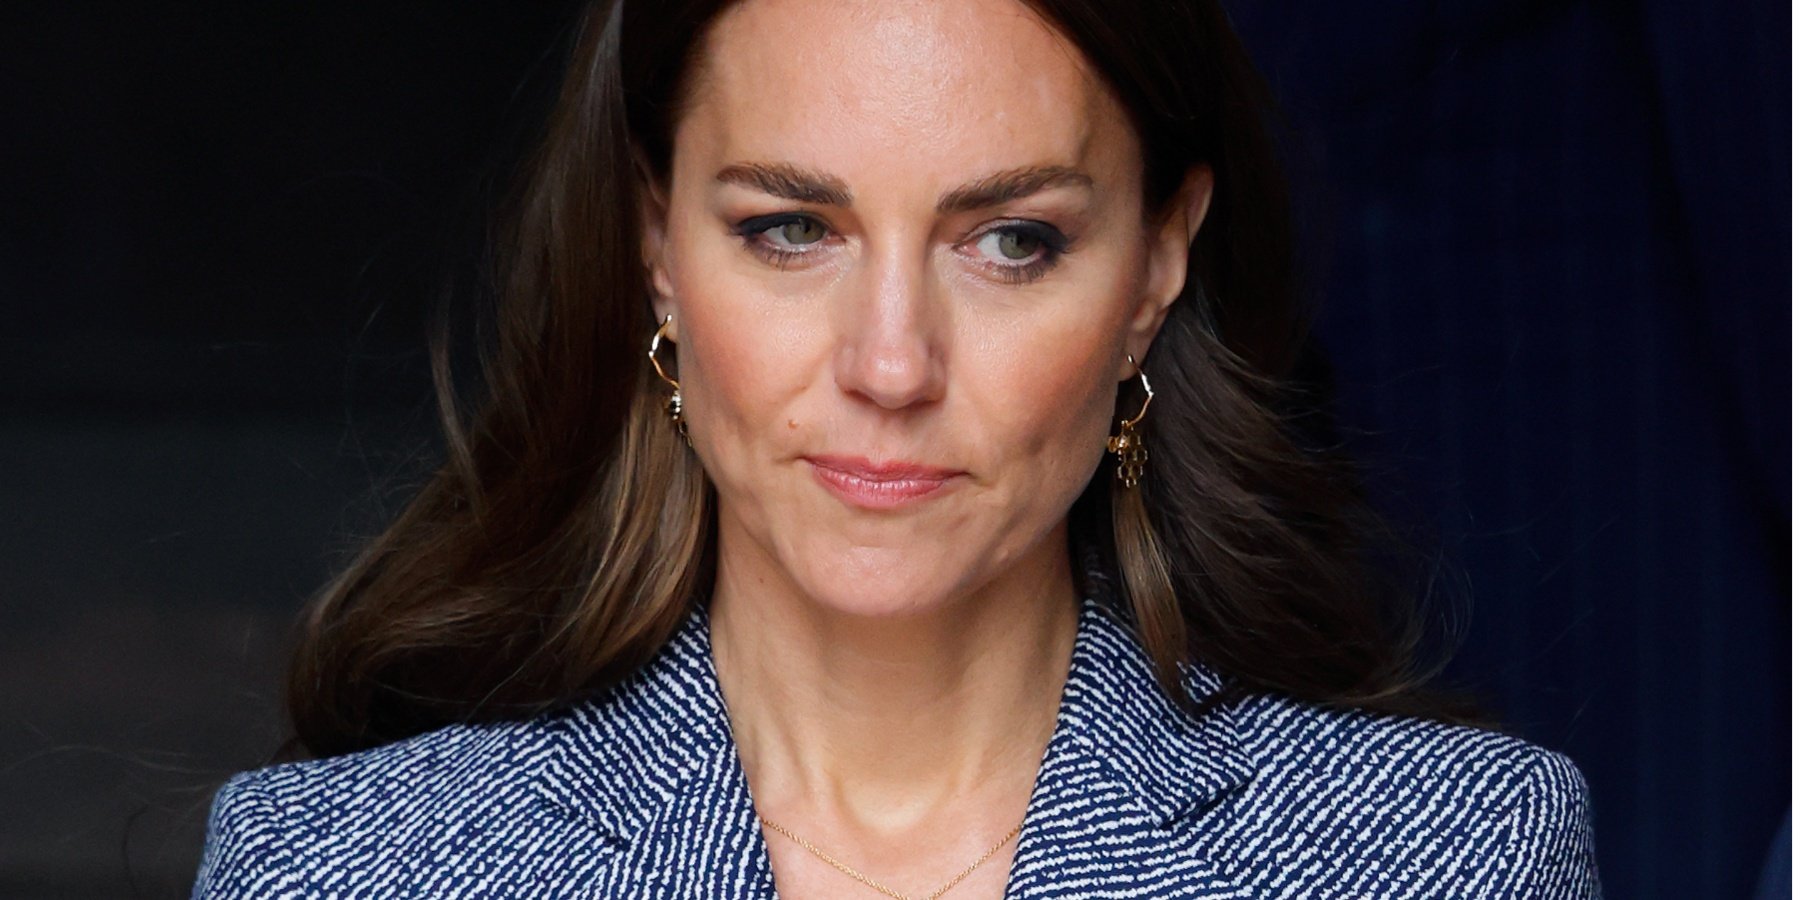 Is Kate Middleton getting 'bullied' by the press to reveal personal health details?